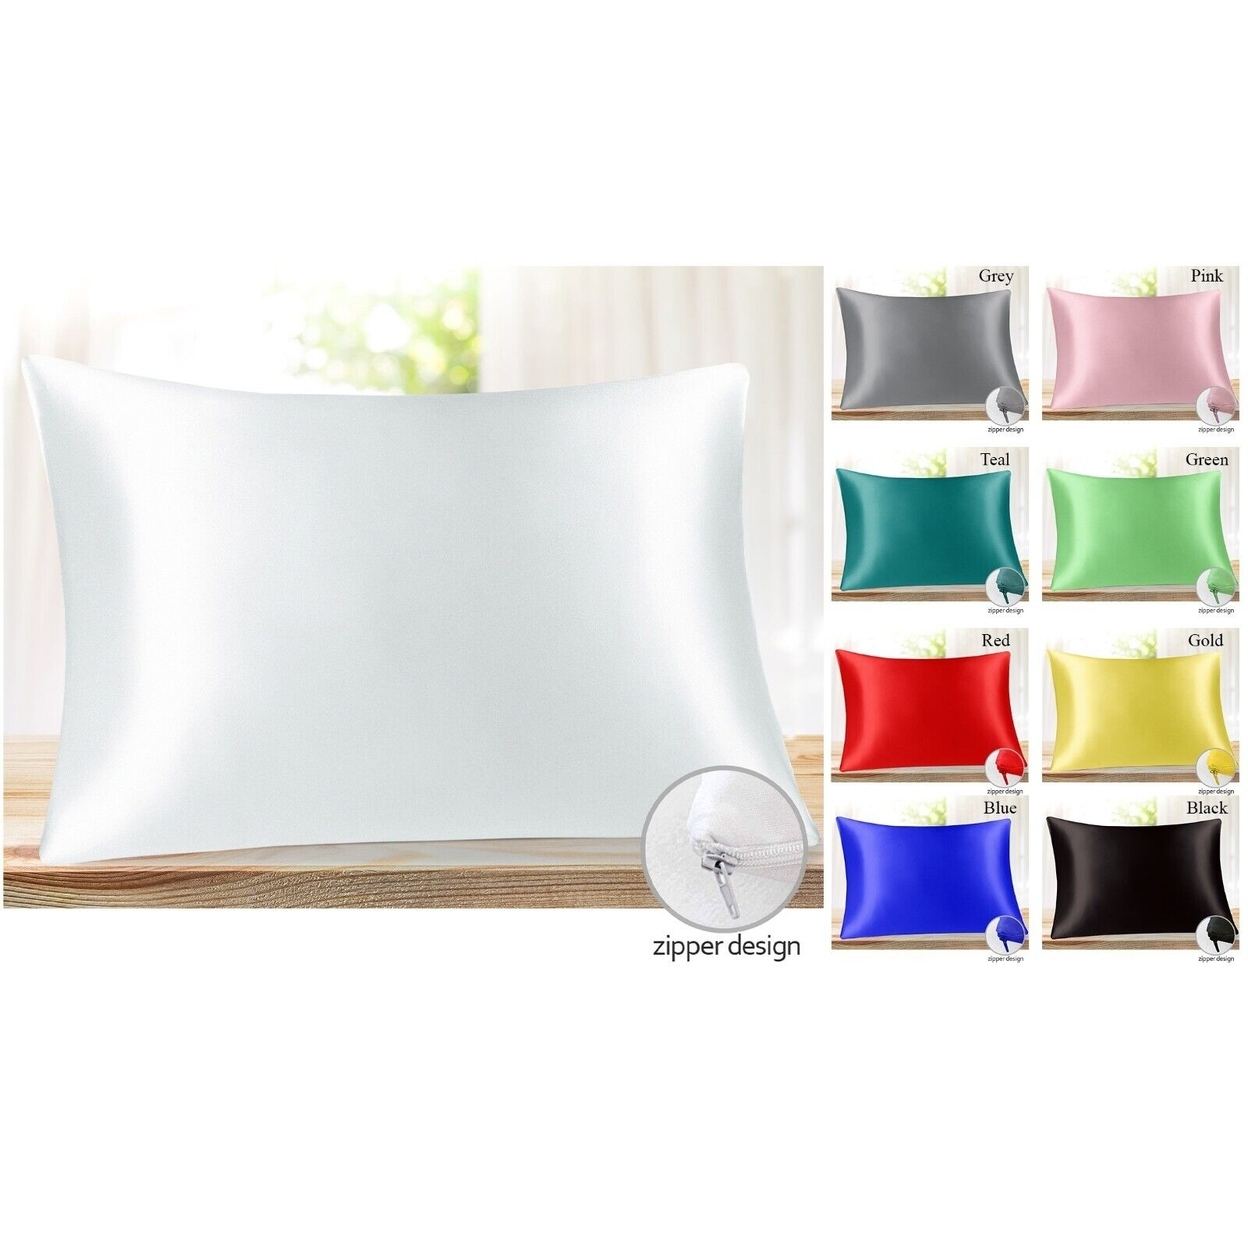 Multi-Pack Smooth Natural Cooling Zippered Queen Satin Pillow Cover Protectors - White&white, 4